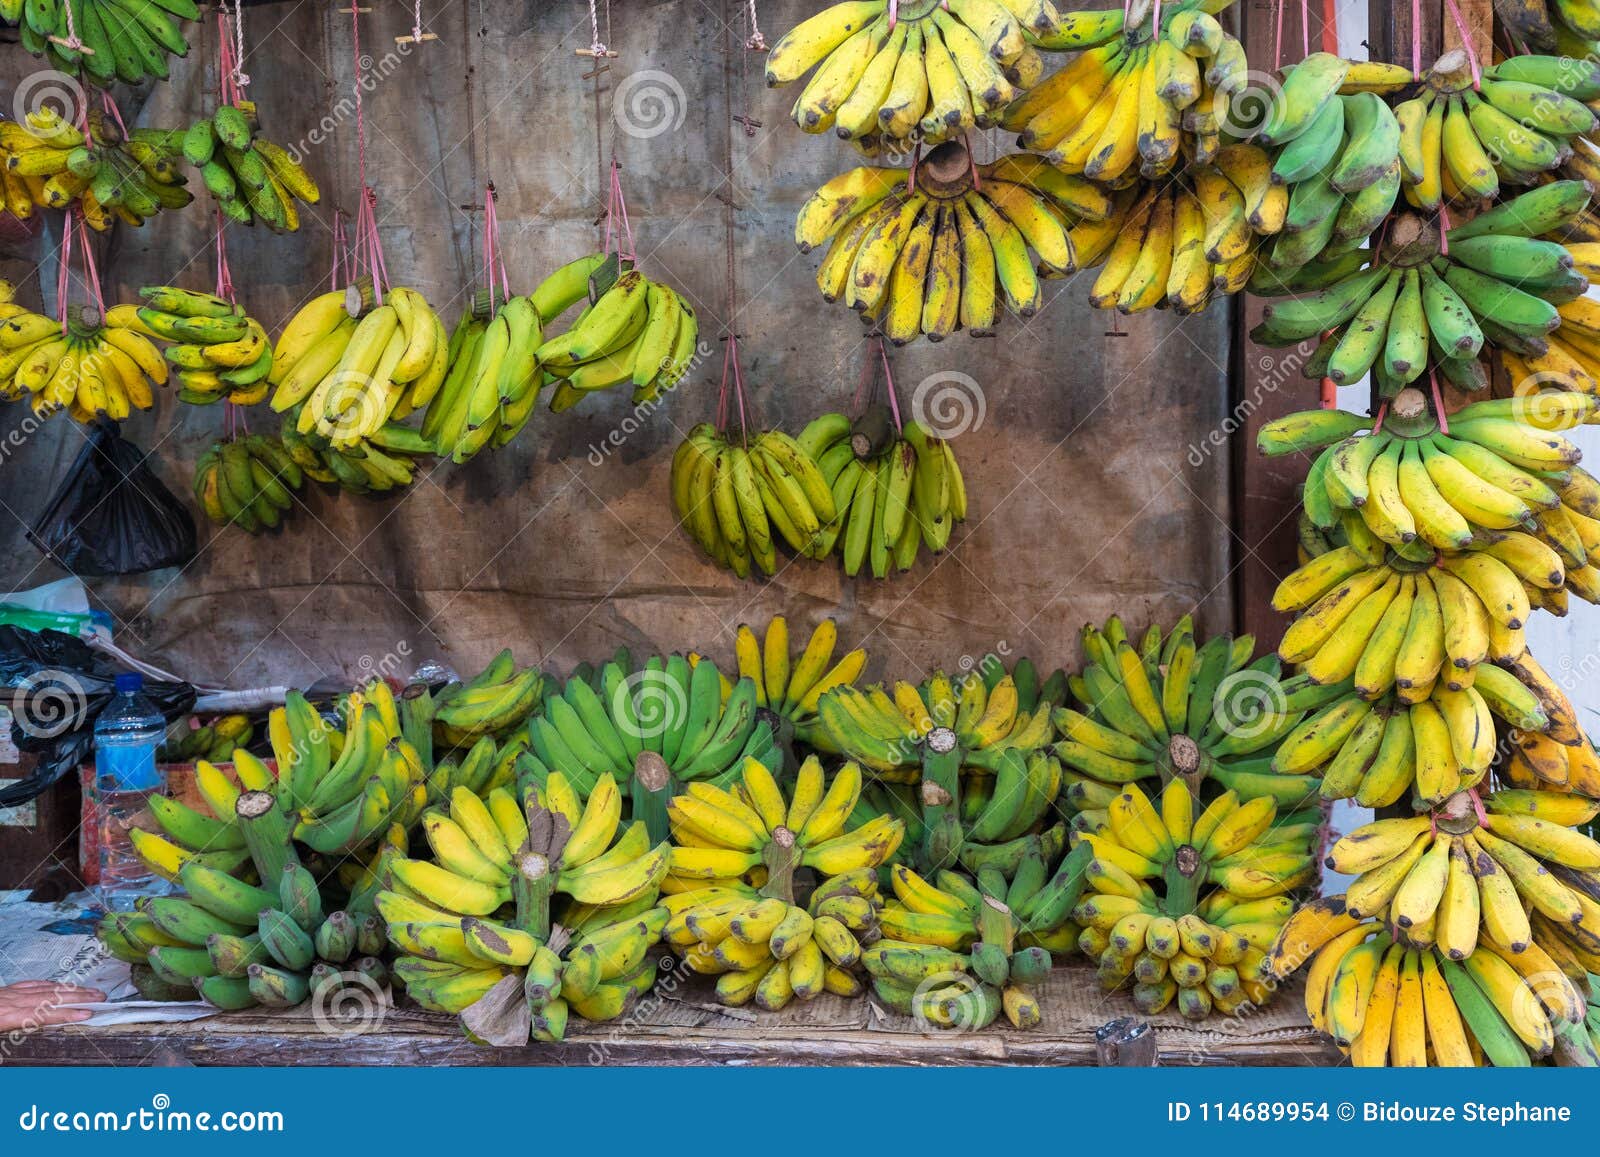 Banana shop in Indonesia stock photo. Image of retail - 114689954